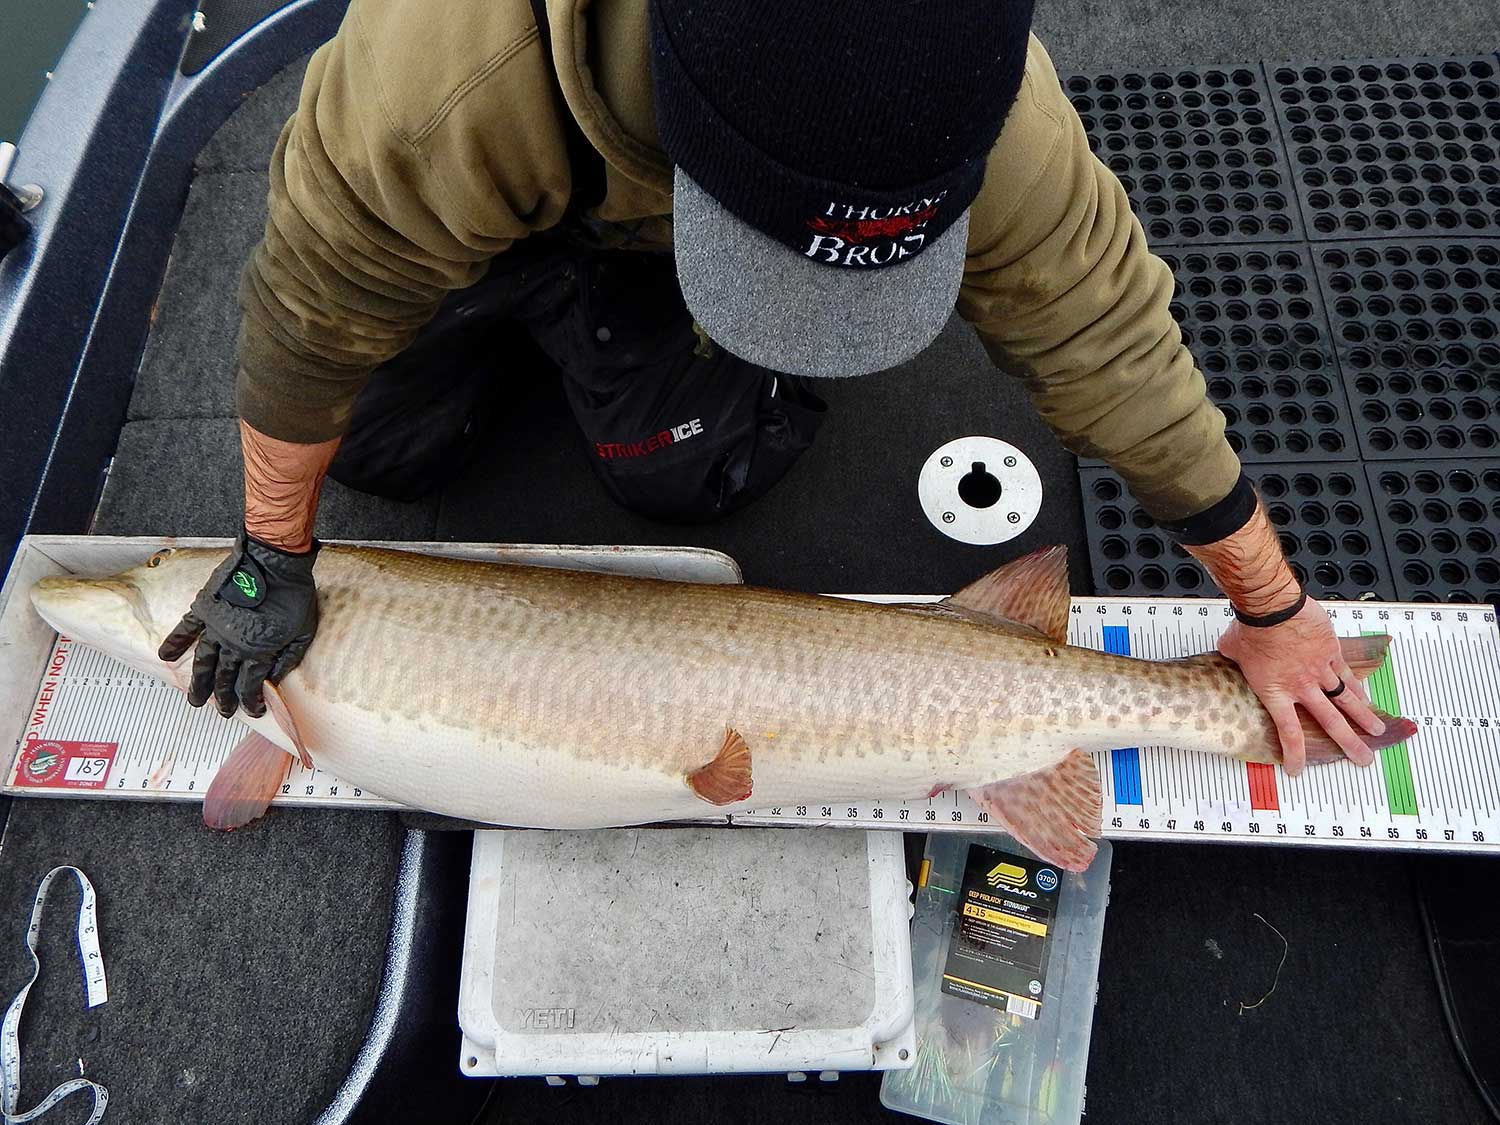 An angler measures the length of a muskie fish.